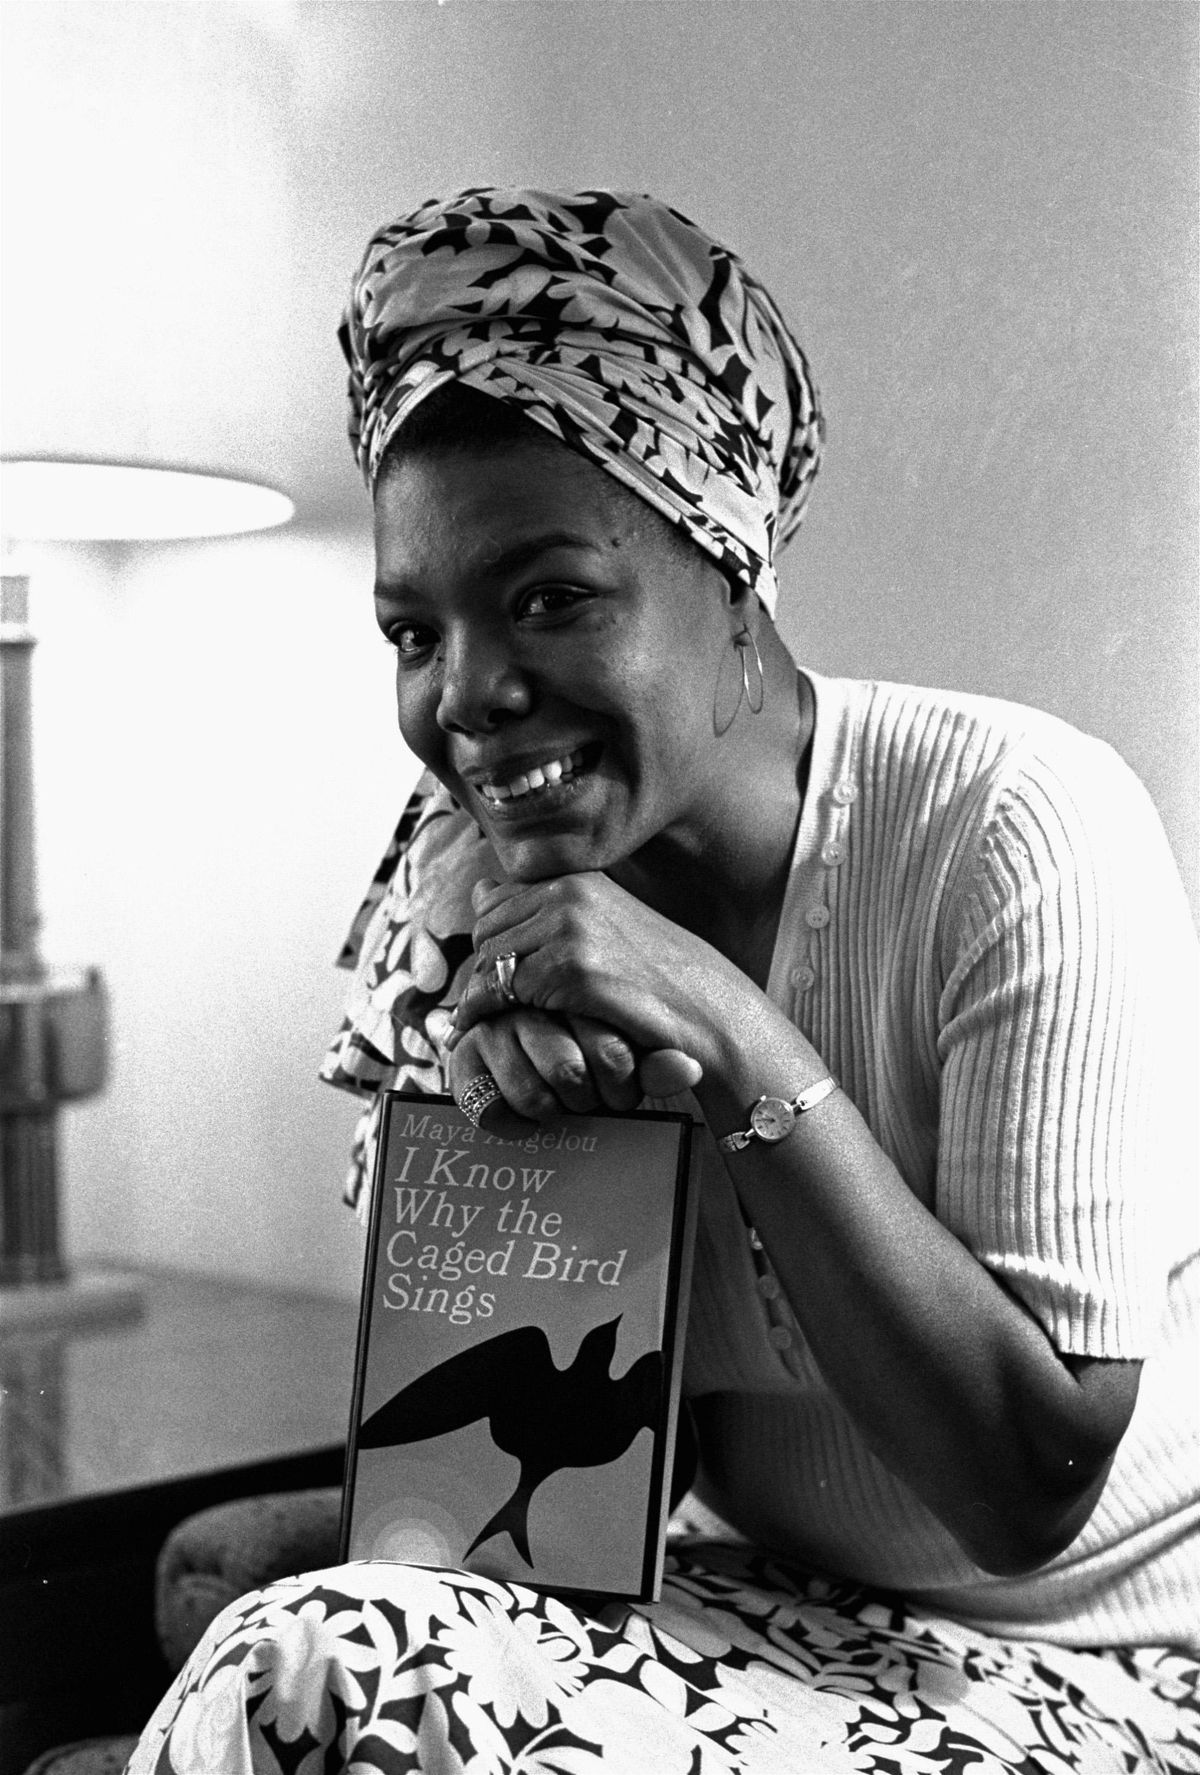 FILE - In this Nov. 3, 1971 file photo, Maya Angelou poses with a copy of her book, "I Know Why the Caged Bird Sings," in Los Angeles. Angelou, a Renaissance woman and cultural pioneer, has died, Wake Forest University said in a statement Wednesday, May 28, 2014. She was 86. 